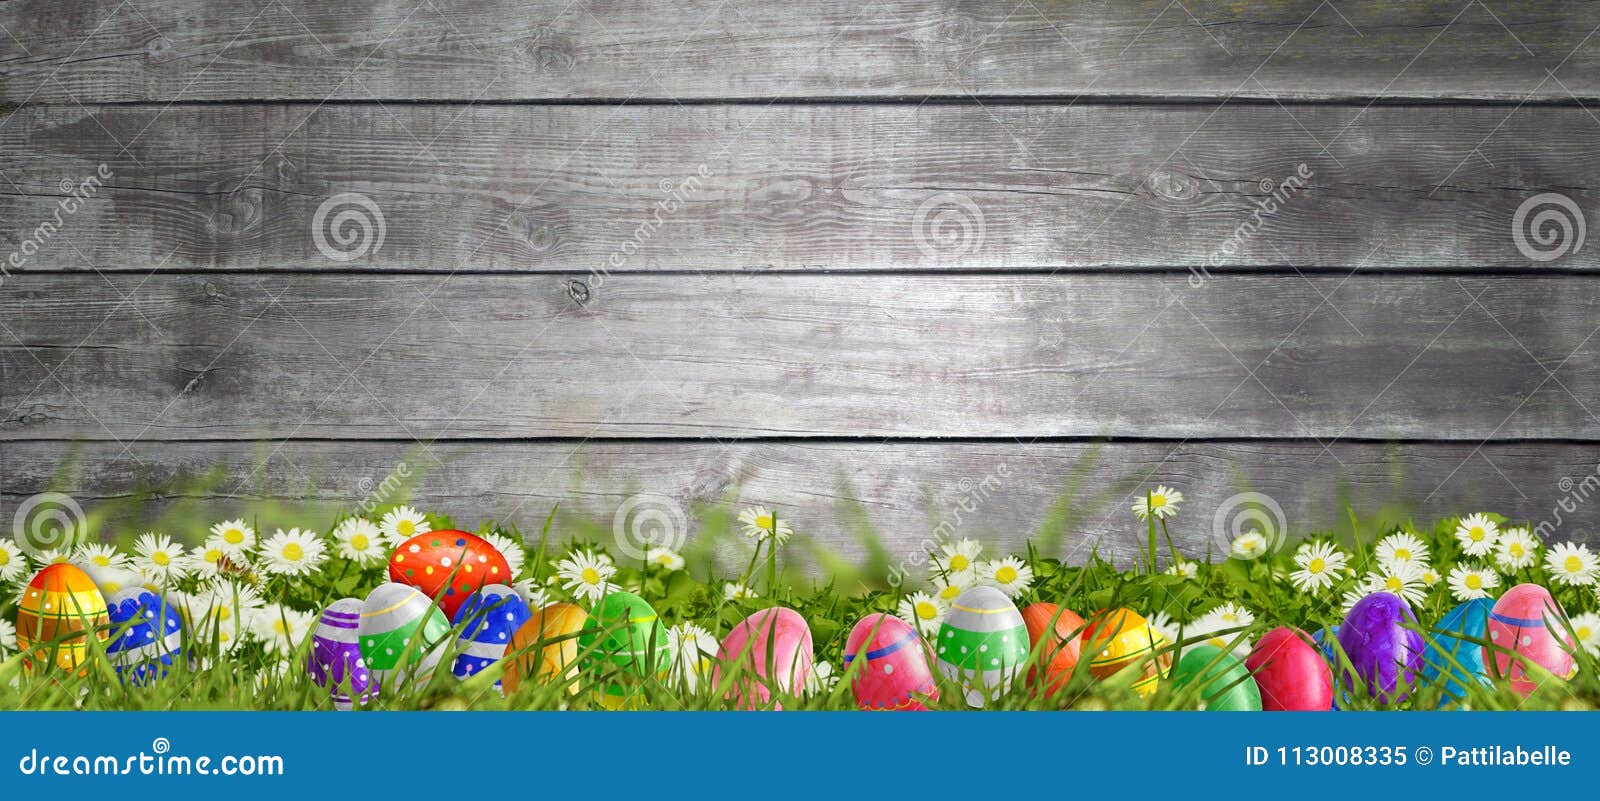 Easter - Meadow with Easter Eggs and Wood Background Stock Image ...